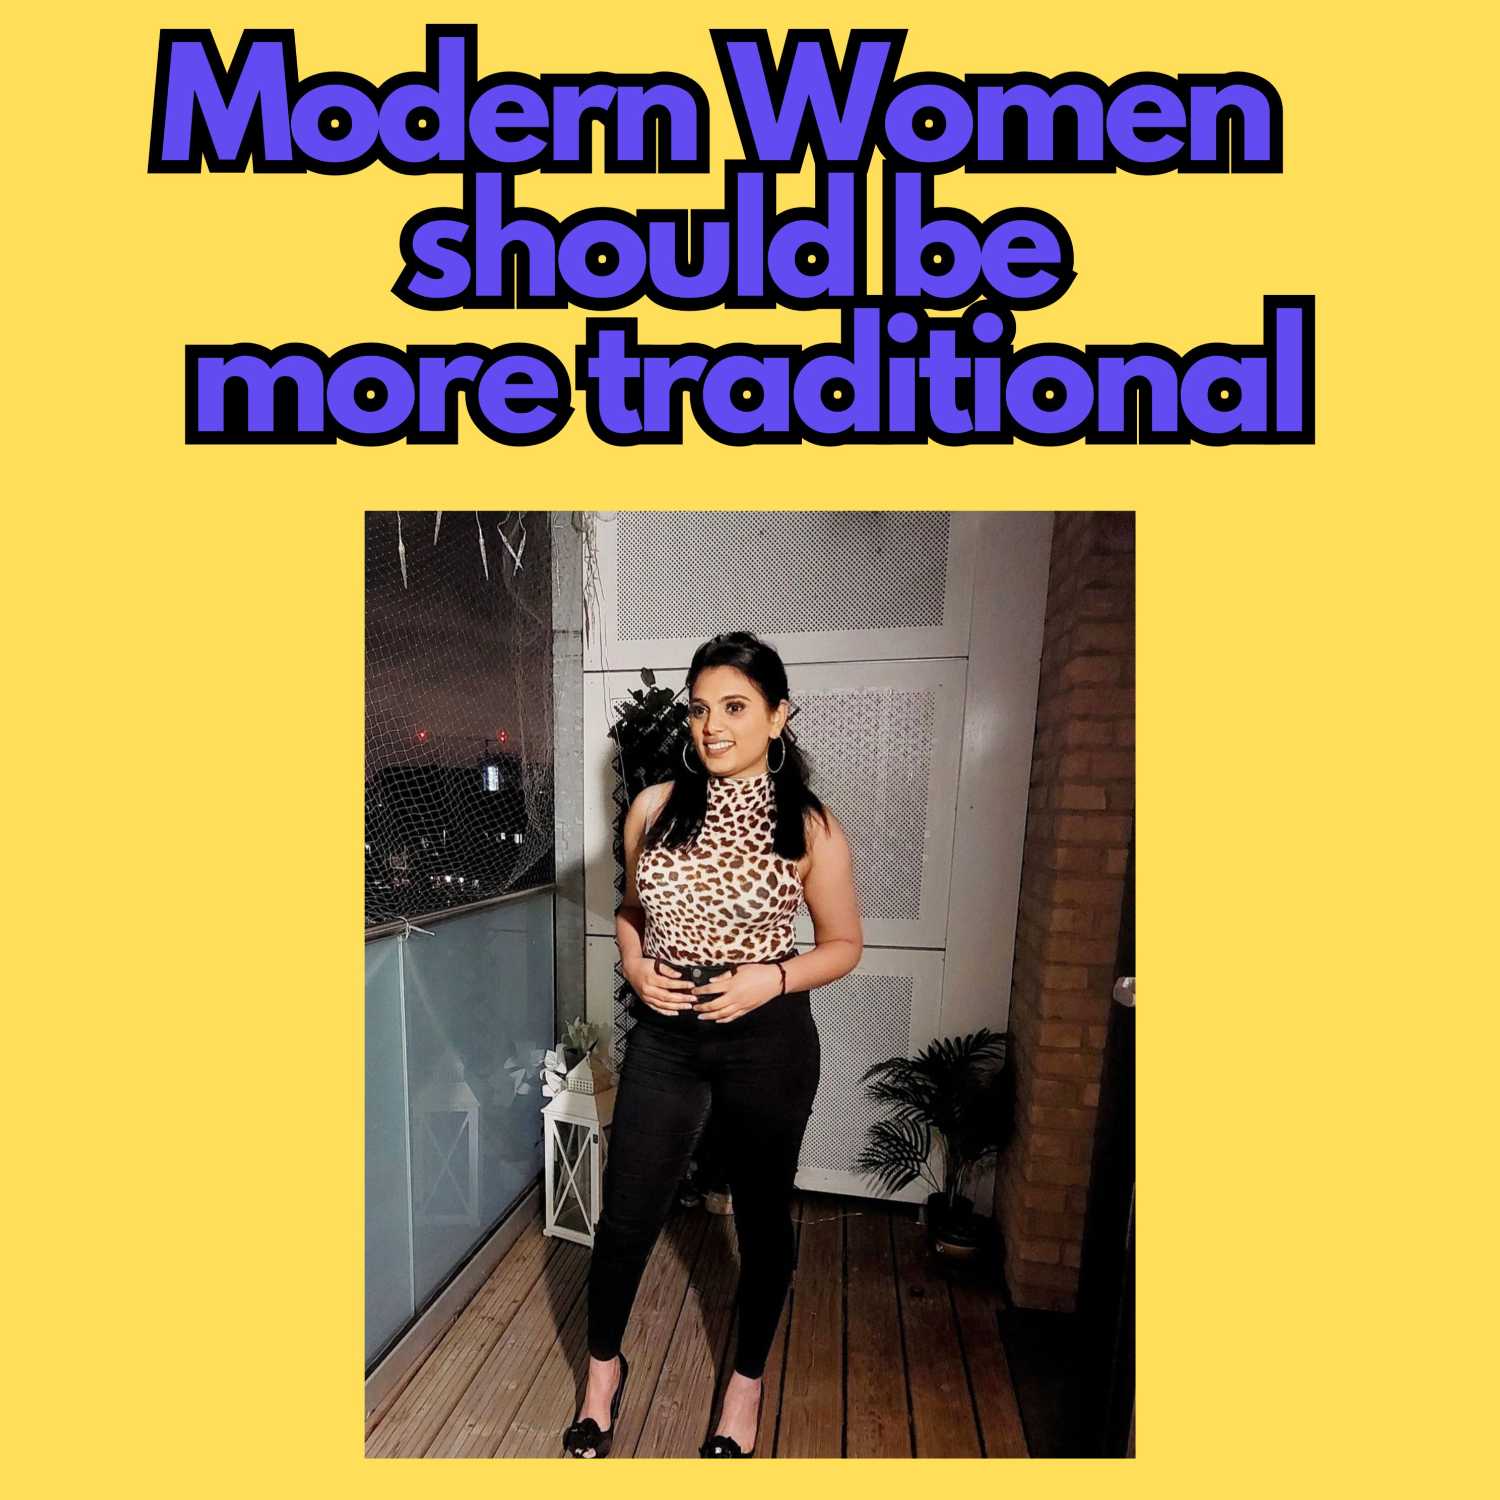 Modern Women NEED to be more traditional